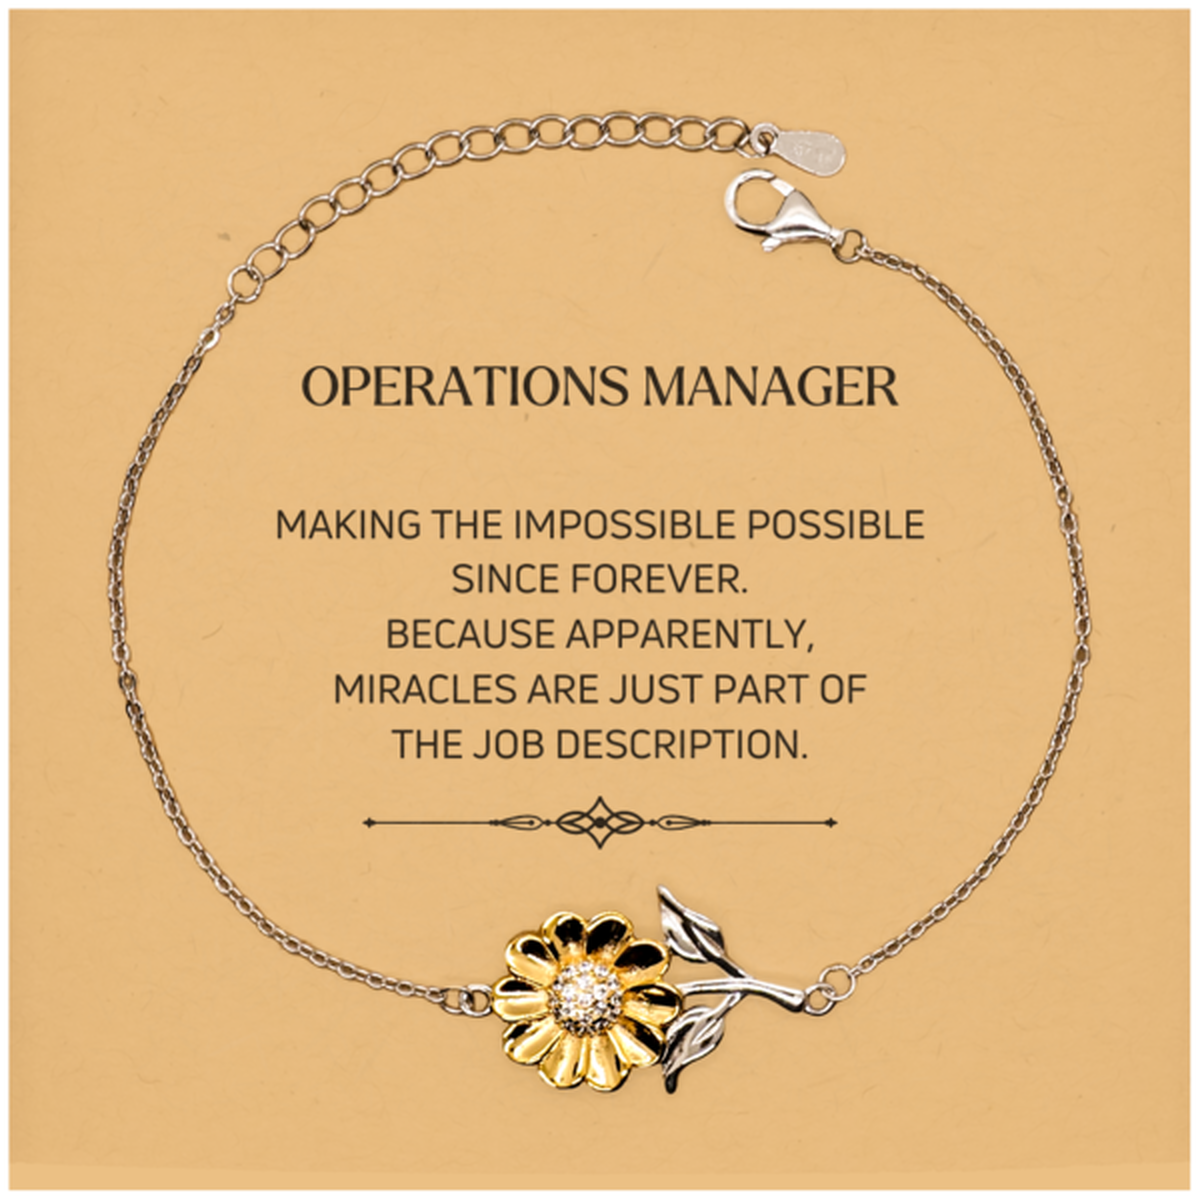 Funny Operations Manager Gifts, Miracles are just part of the job description, Inspirational Birthday Christmas Sunflower Bracelet For Operations Manager, Men, Women, Coworkers, Friends, Boss